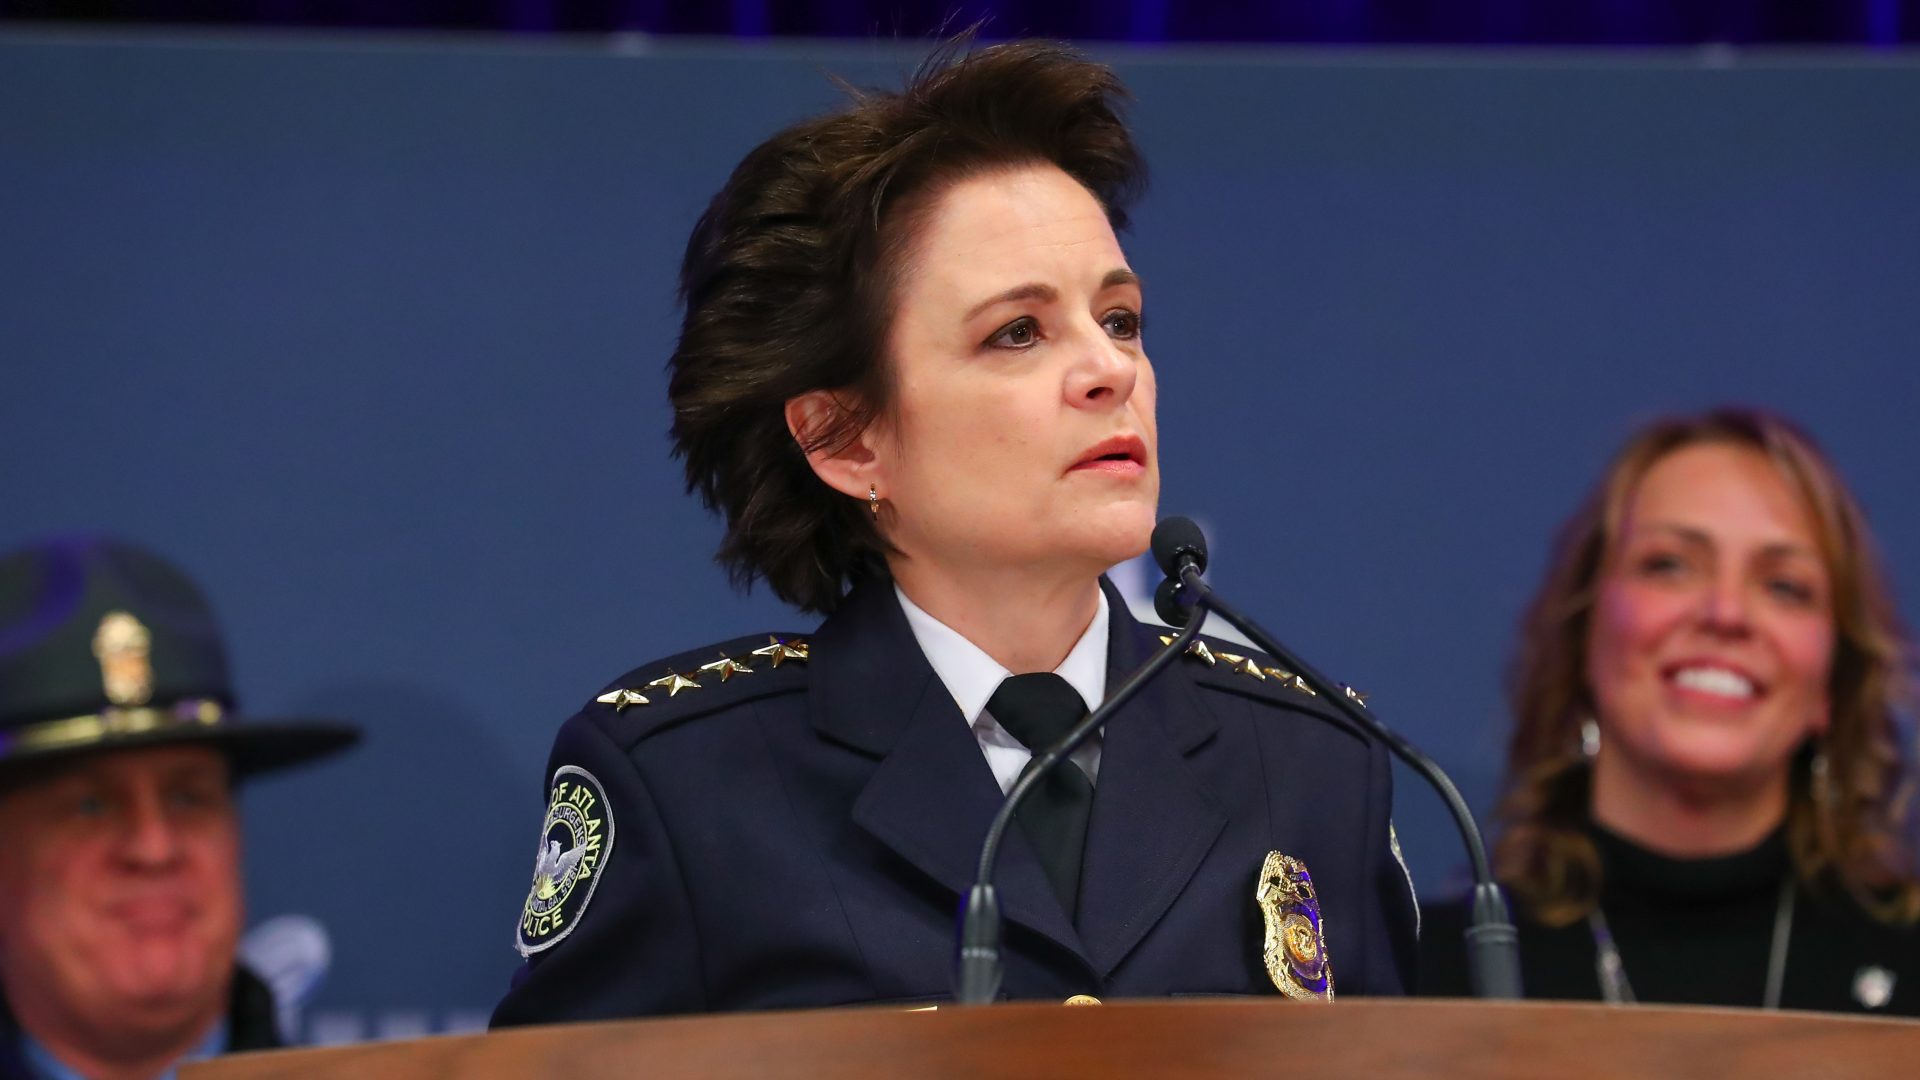 Atlanta Chief of Police Erika Shields during the security press conference during Super Bowl LIII week in January 2019. Shields resigned a day after police shot and killed a 27-year-old black man.